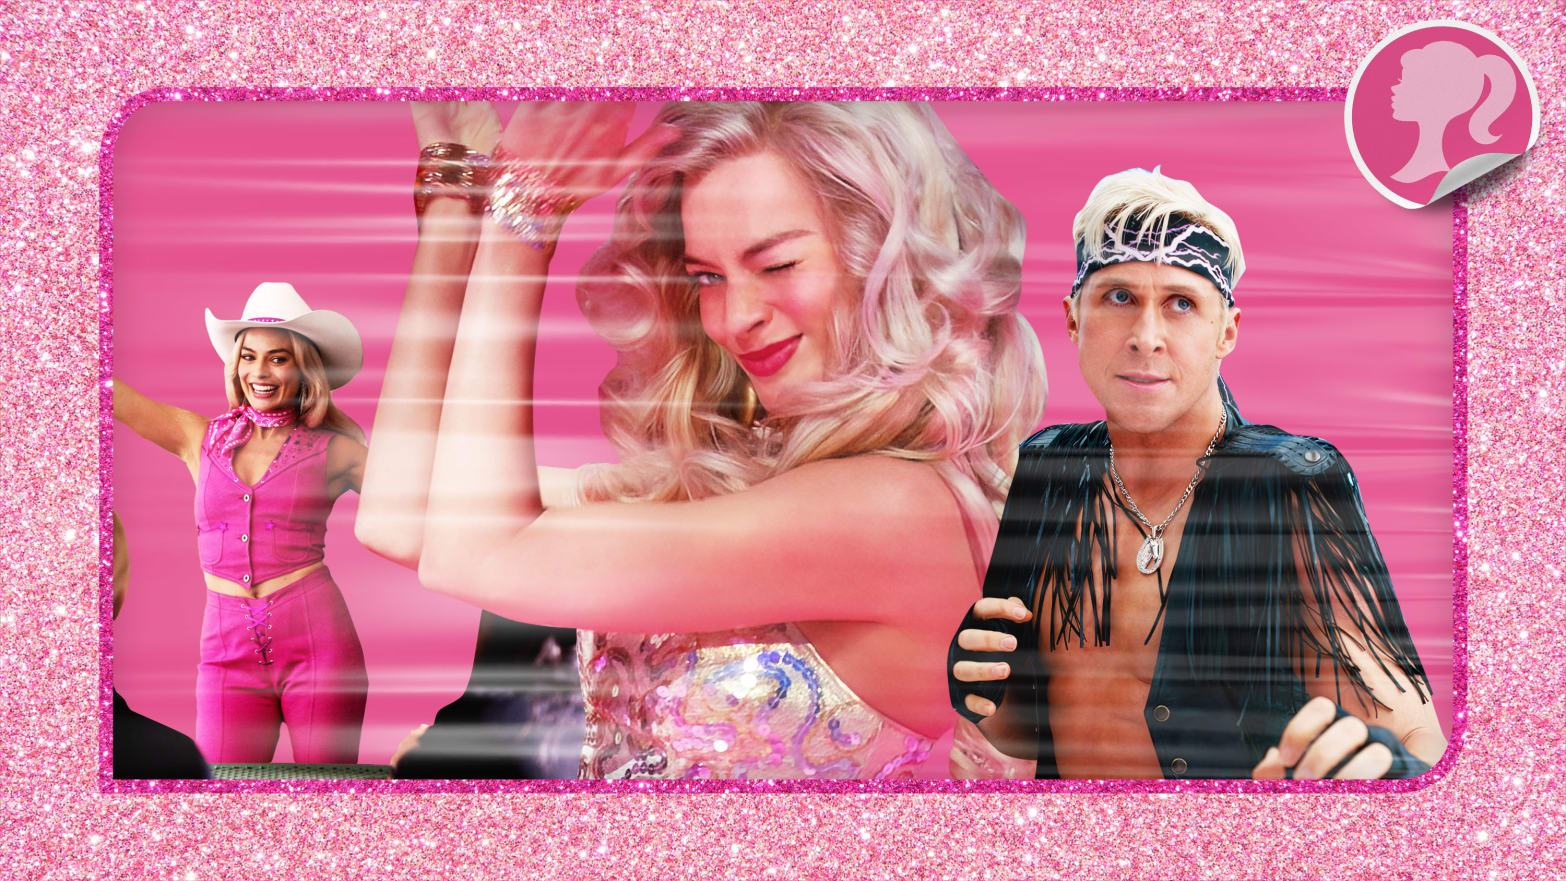 A photo illustration showing stills from Barbie featuring Margot Robbie as Barbie and Ryan Gosling as Ken.